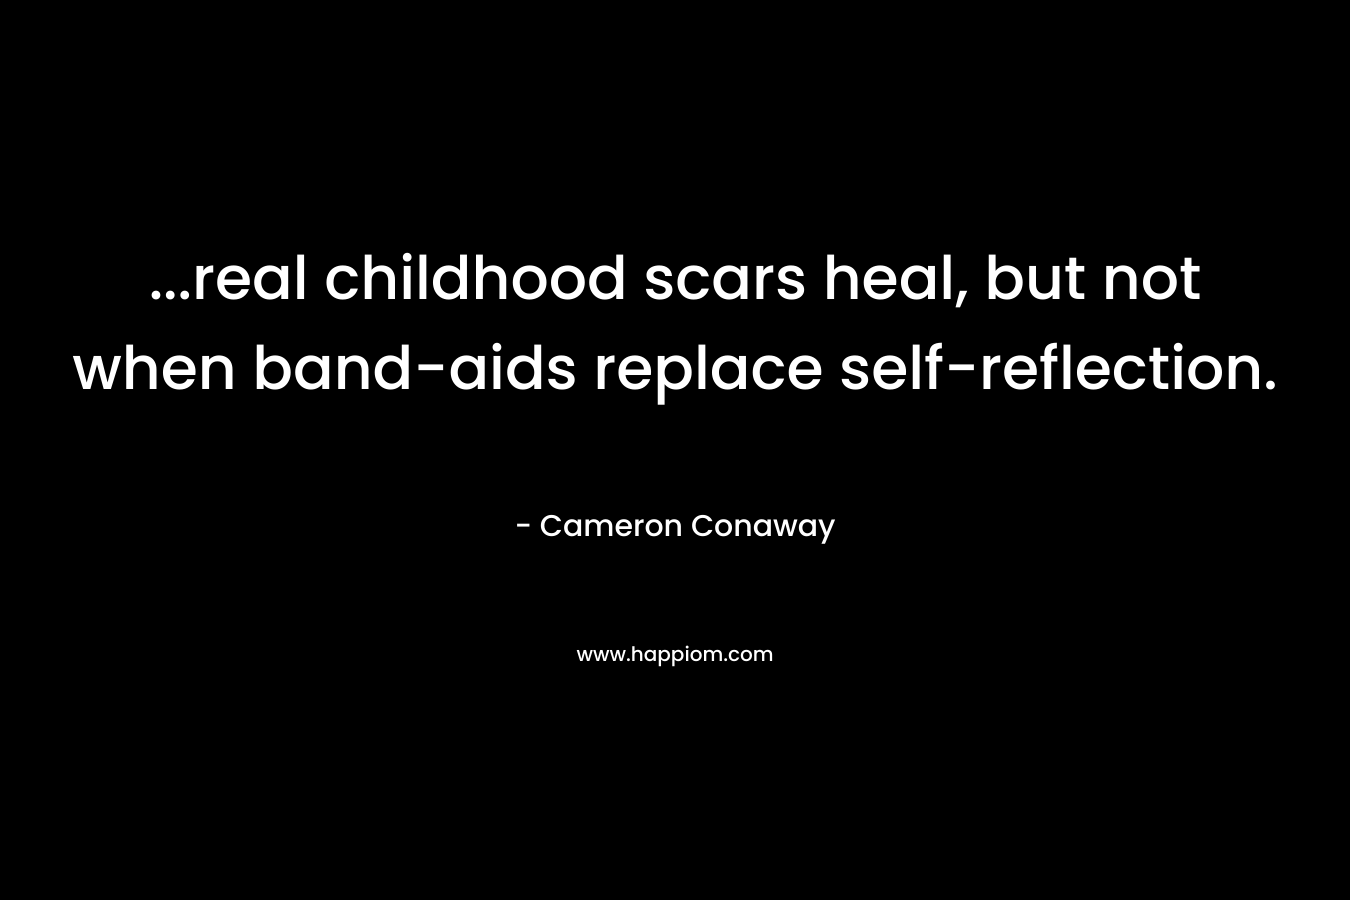 ...real childhood scars heal, but not when band-aids replace self-reflection.